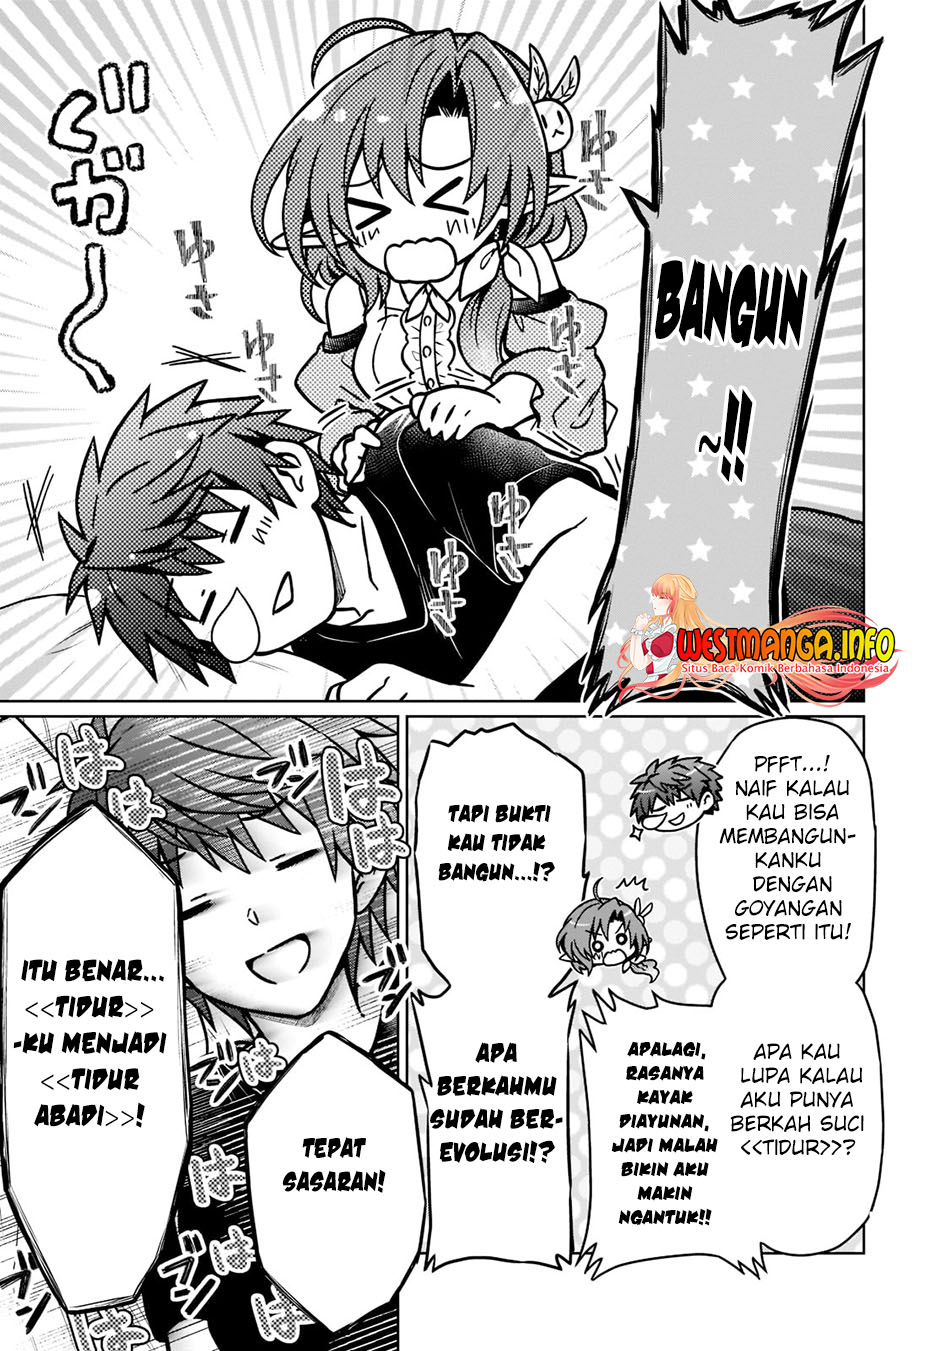 Dilarang COPAS - situs resmi www.mangacanblog.com - Komik d rank adventurer invited by a brave party and the stalking princess 015 - chapter 15 16 Indonesia d rank adventurer invited by a brave party and the stalking princess 015 - chapter 15 Terbaru 6|Baca Manga Komik Indonesia|Mangacan